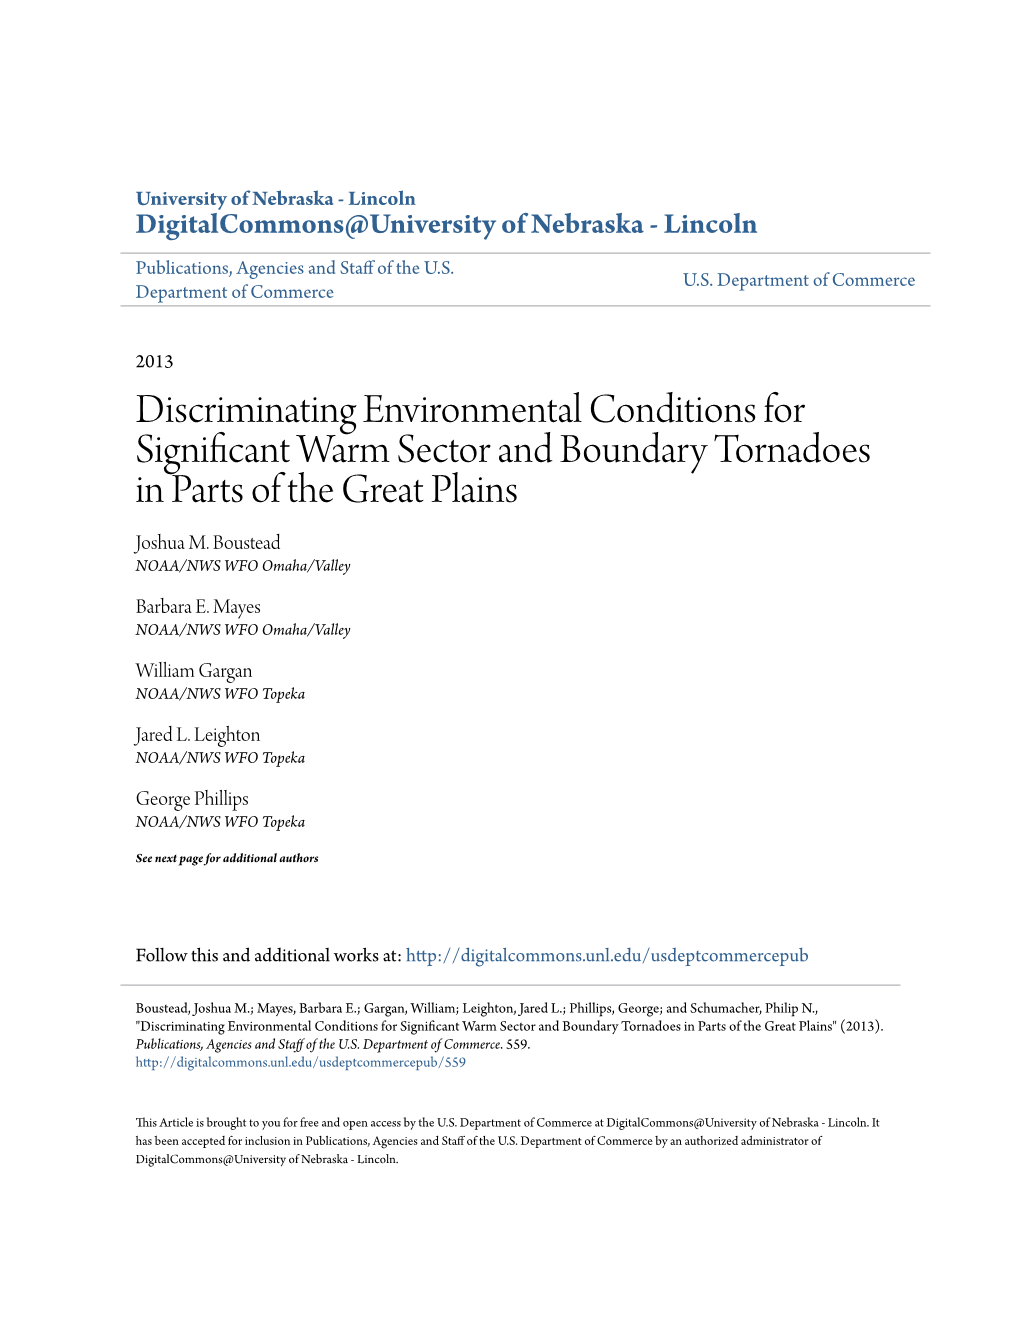 Discriminating Environmental Conditions for Significant Warm Sector and Boundary Tornadoes in Parts of the Great Plains Joshua M